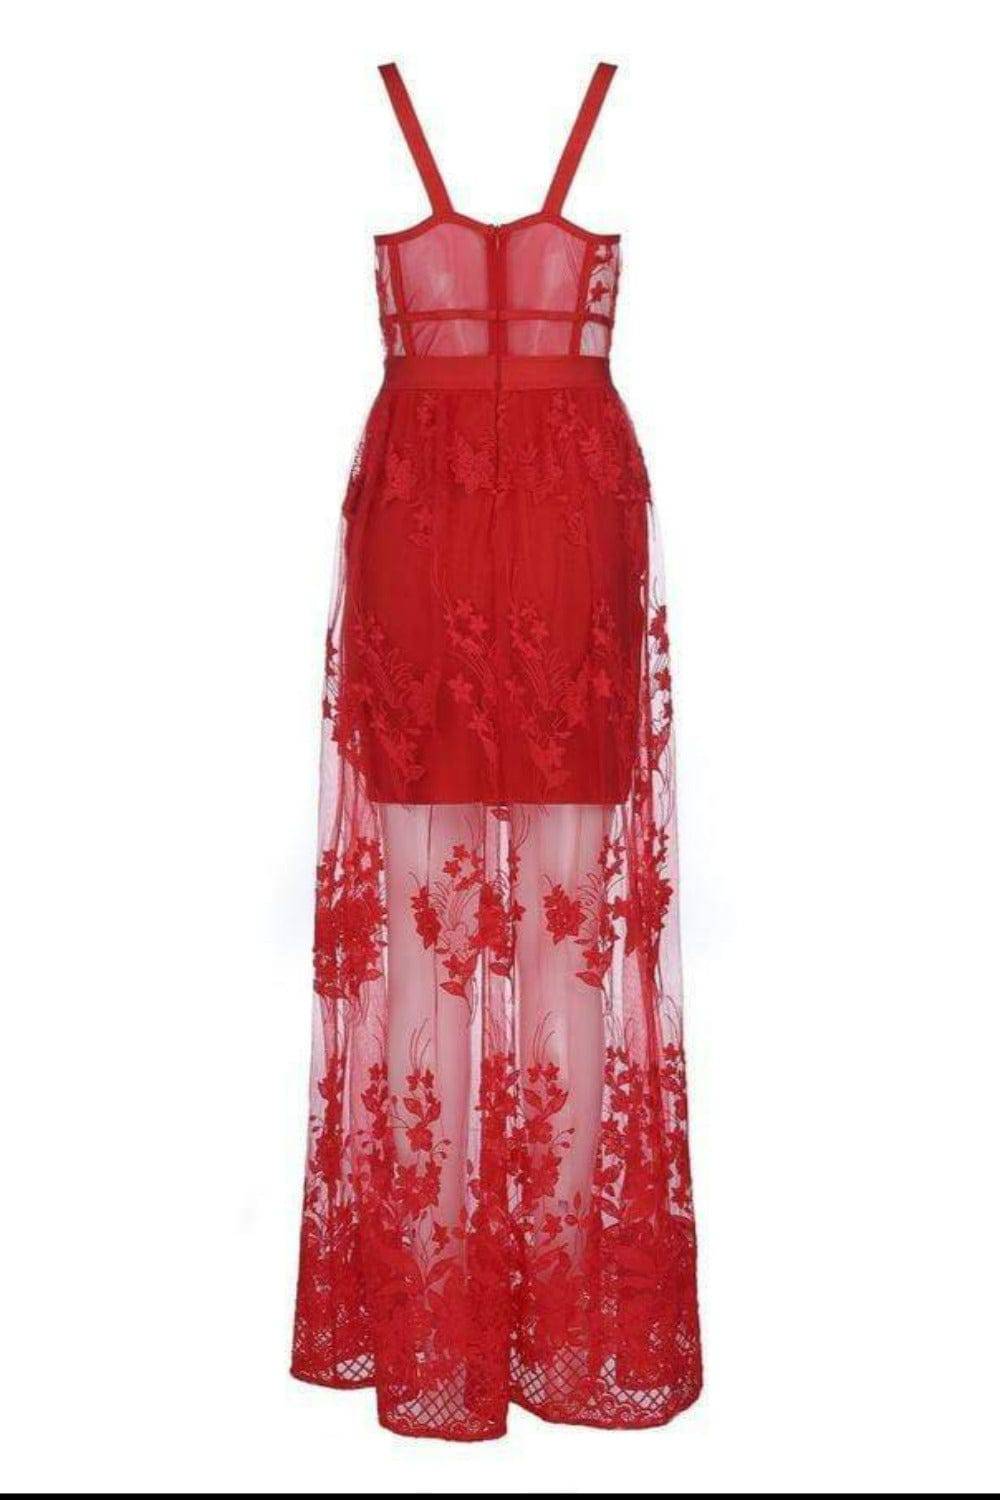 My Moment To Shine Red Lace Corset Dress - TGC Boutique - Red Bodycon Dress